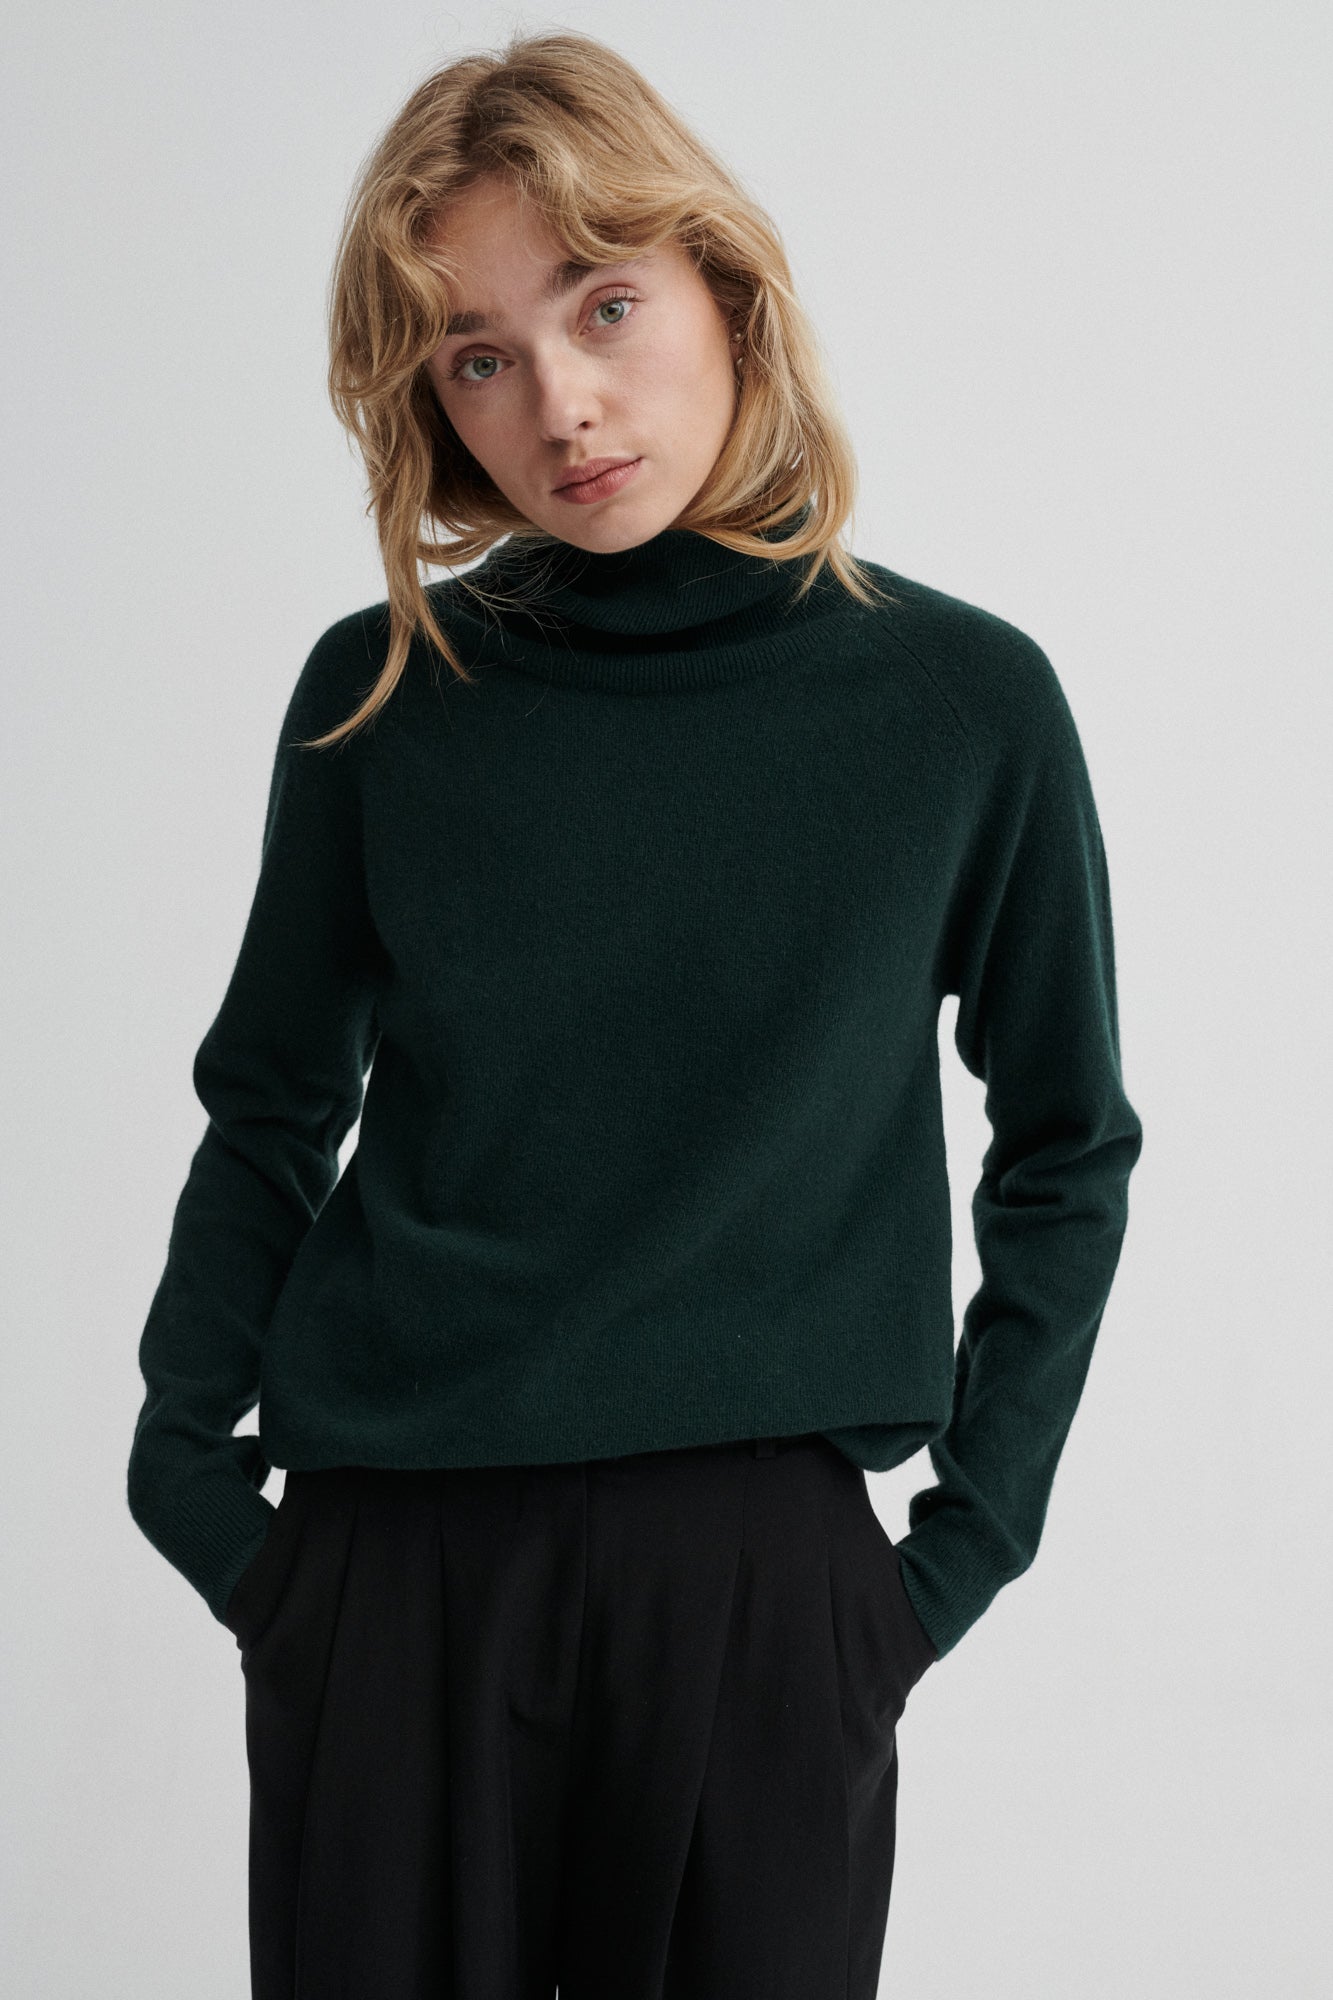 Sweater in cashmere / 16 / 13 / ivy green